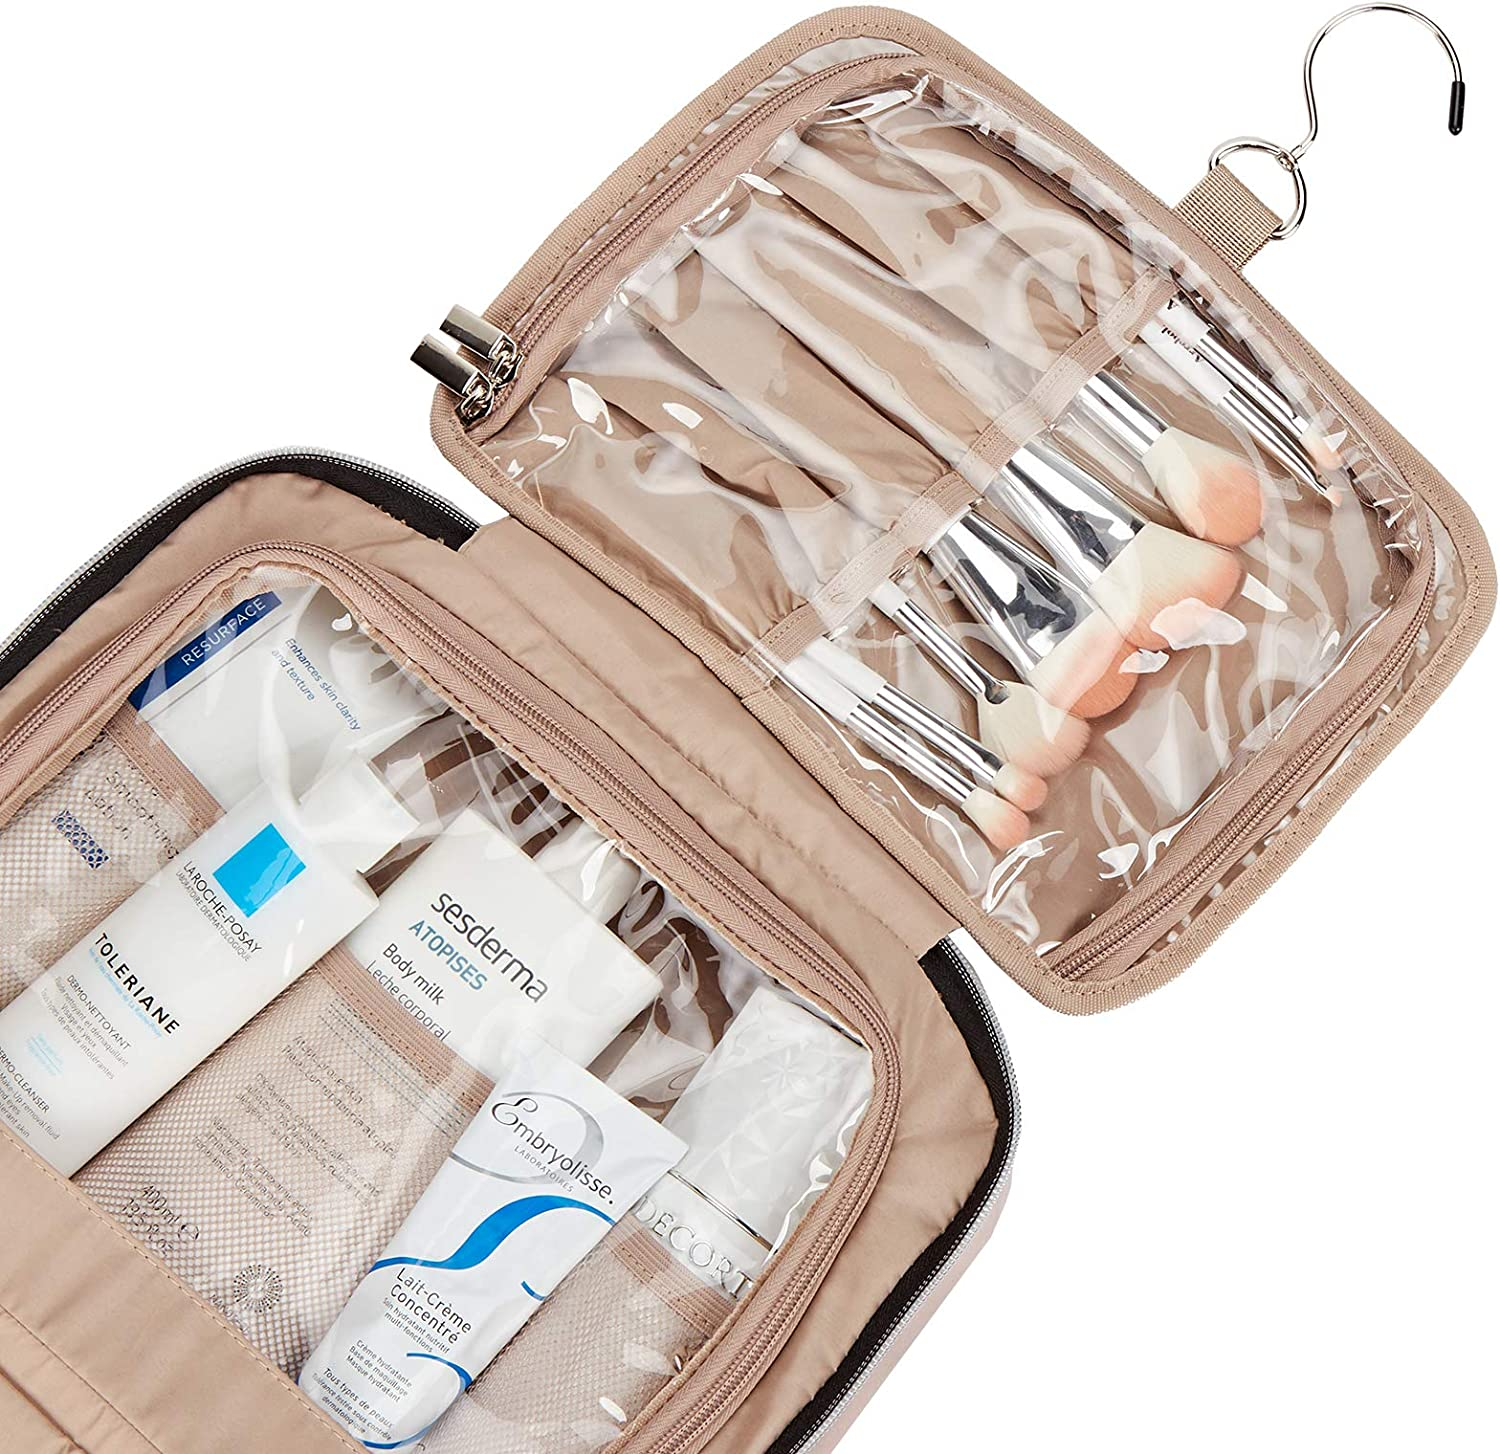 The 9 Best Travel Makeup Bags The Real Deal by RetailMeNot